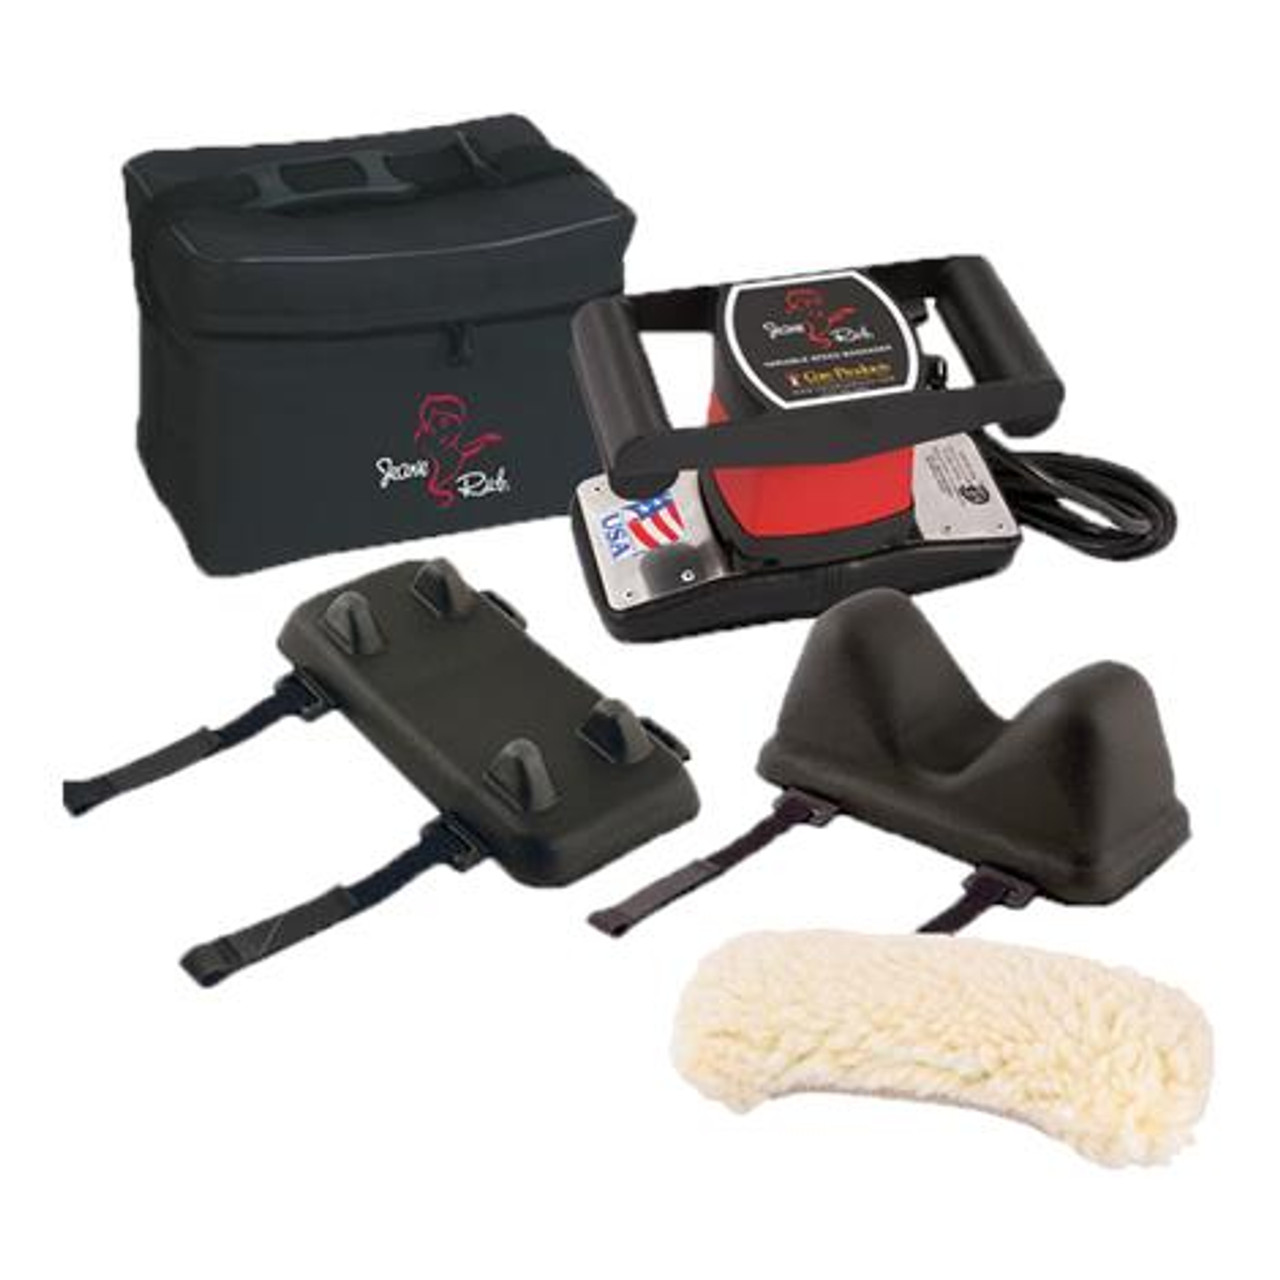 Core Products PRO-3405 Jeanie Rub Professional Package